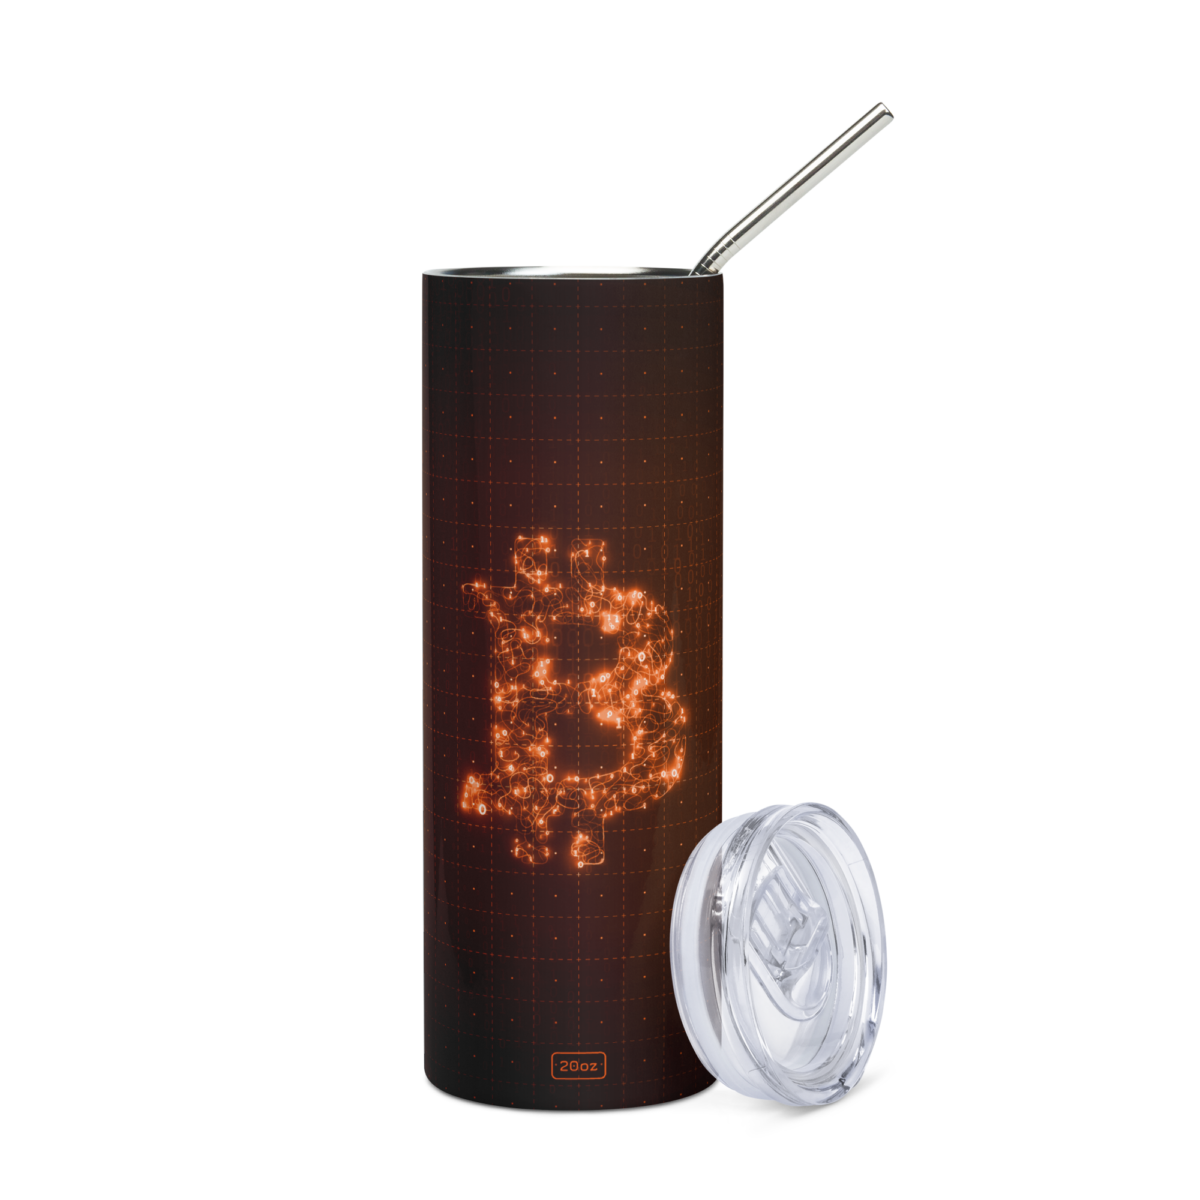 stainless steel tumbler black front 63a0843cd141e - Glowing Bitcoin Stainless Steel Tumbler